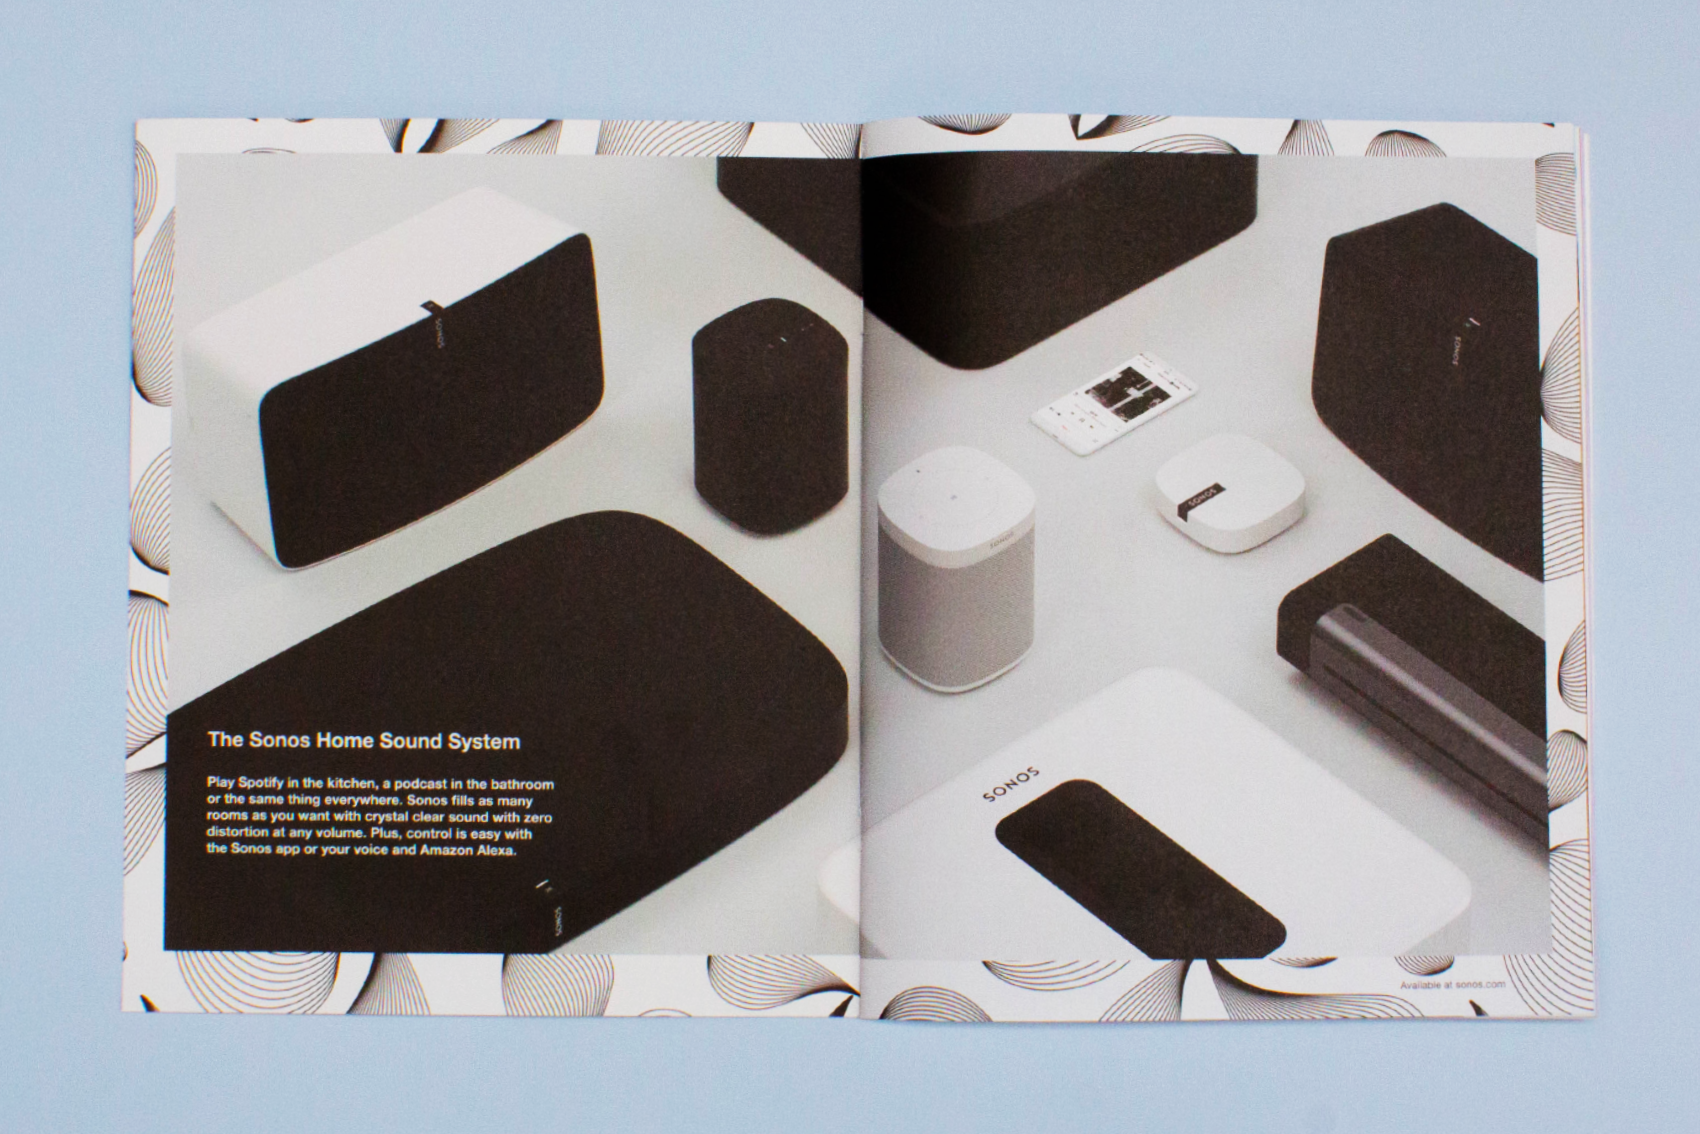 Another two-page spread seen from above